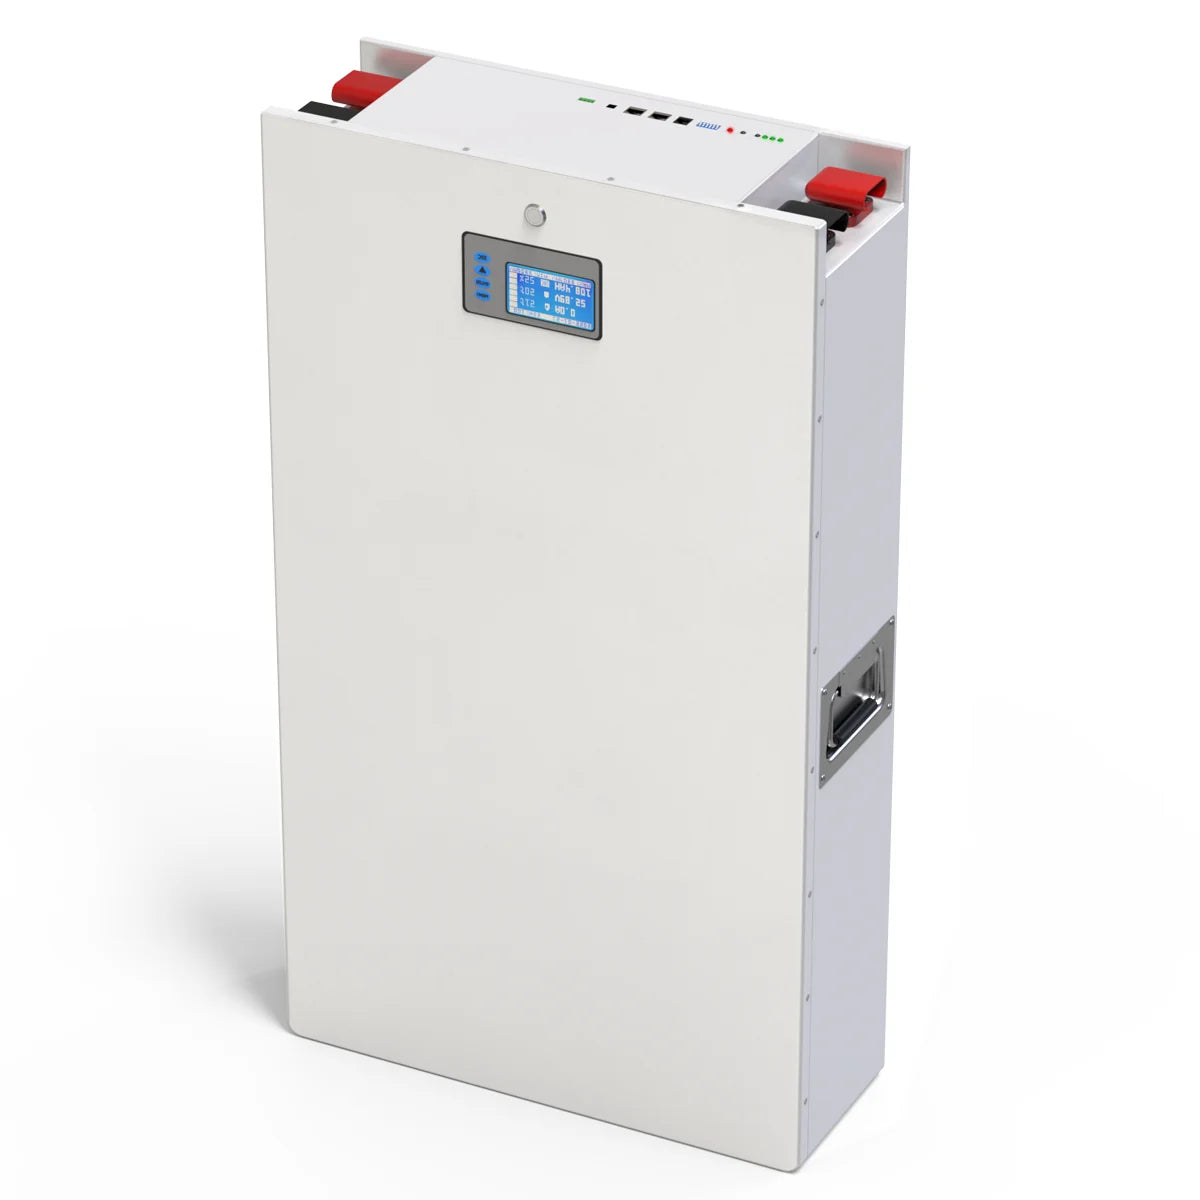 LiFePO4 Battery, 48V 10kW Powerwall Inverter Specifications, Lifepo4 Batteries, 10240Wh Capacity, 10-Year Warranty and OEM Support.